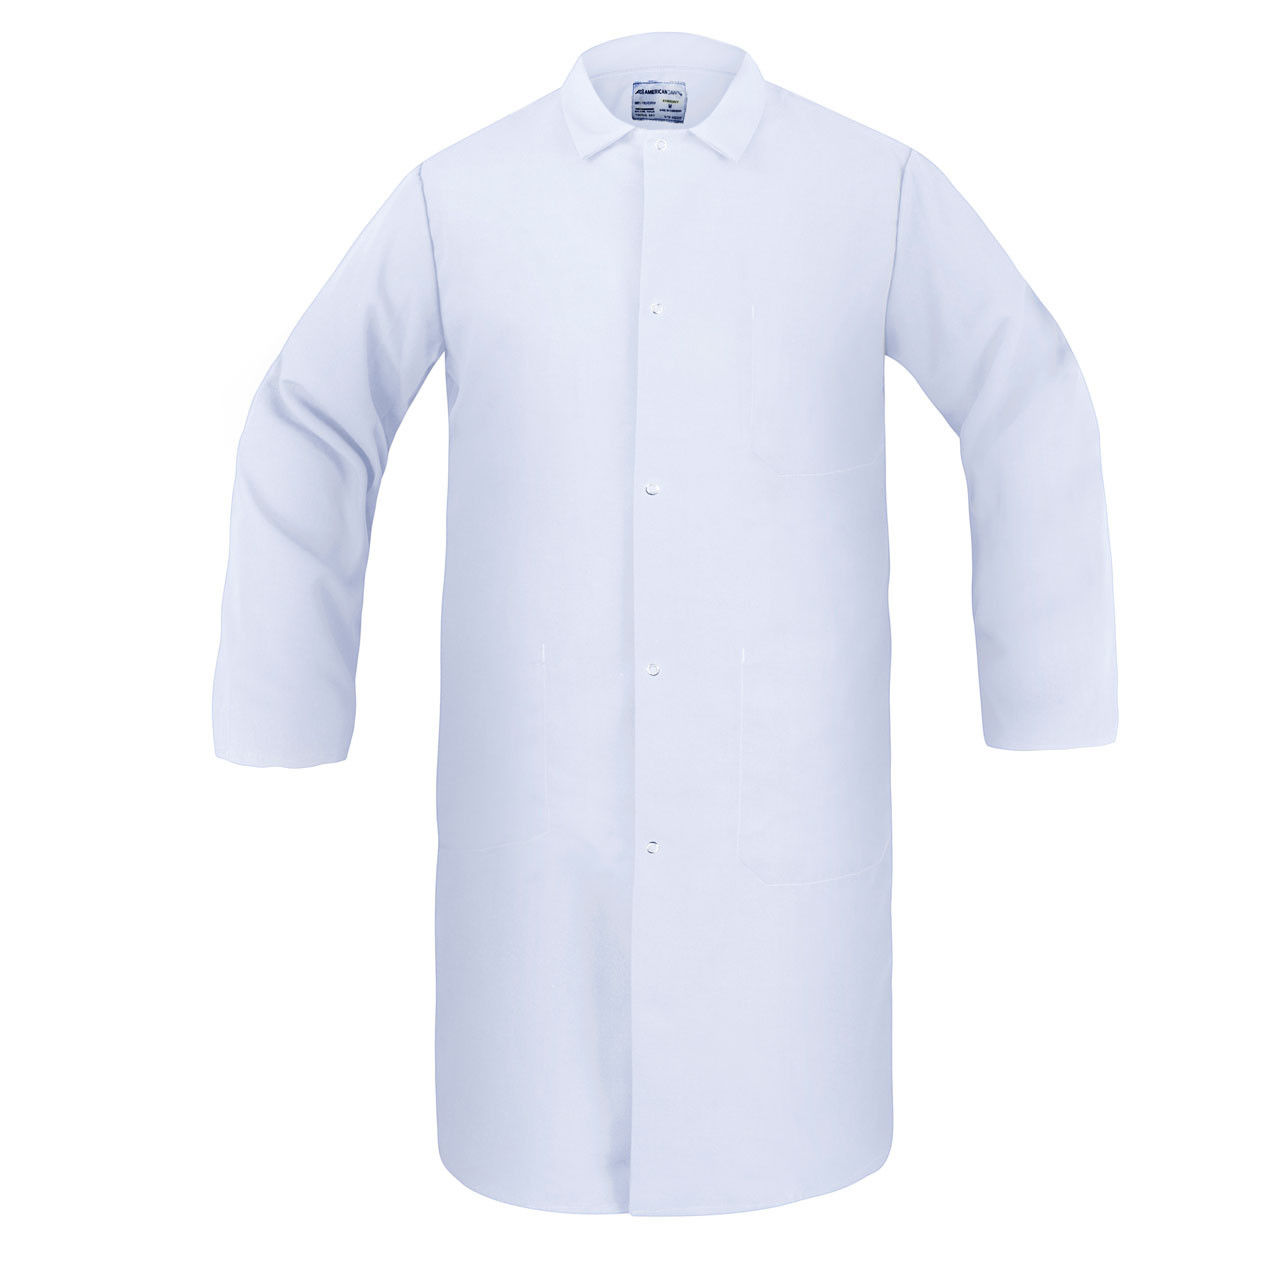 What is the size of the internal lower pockets in these butcher frocks?